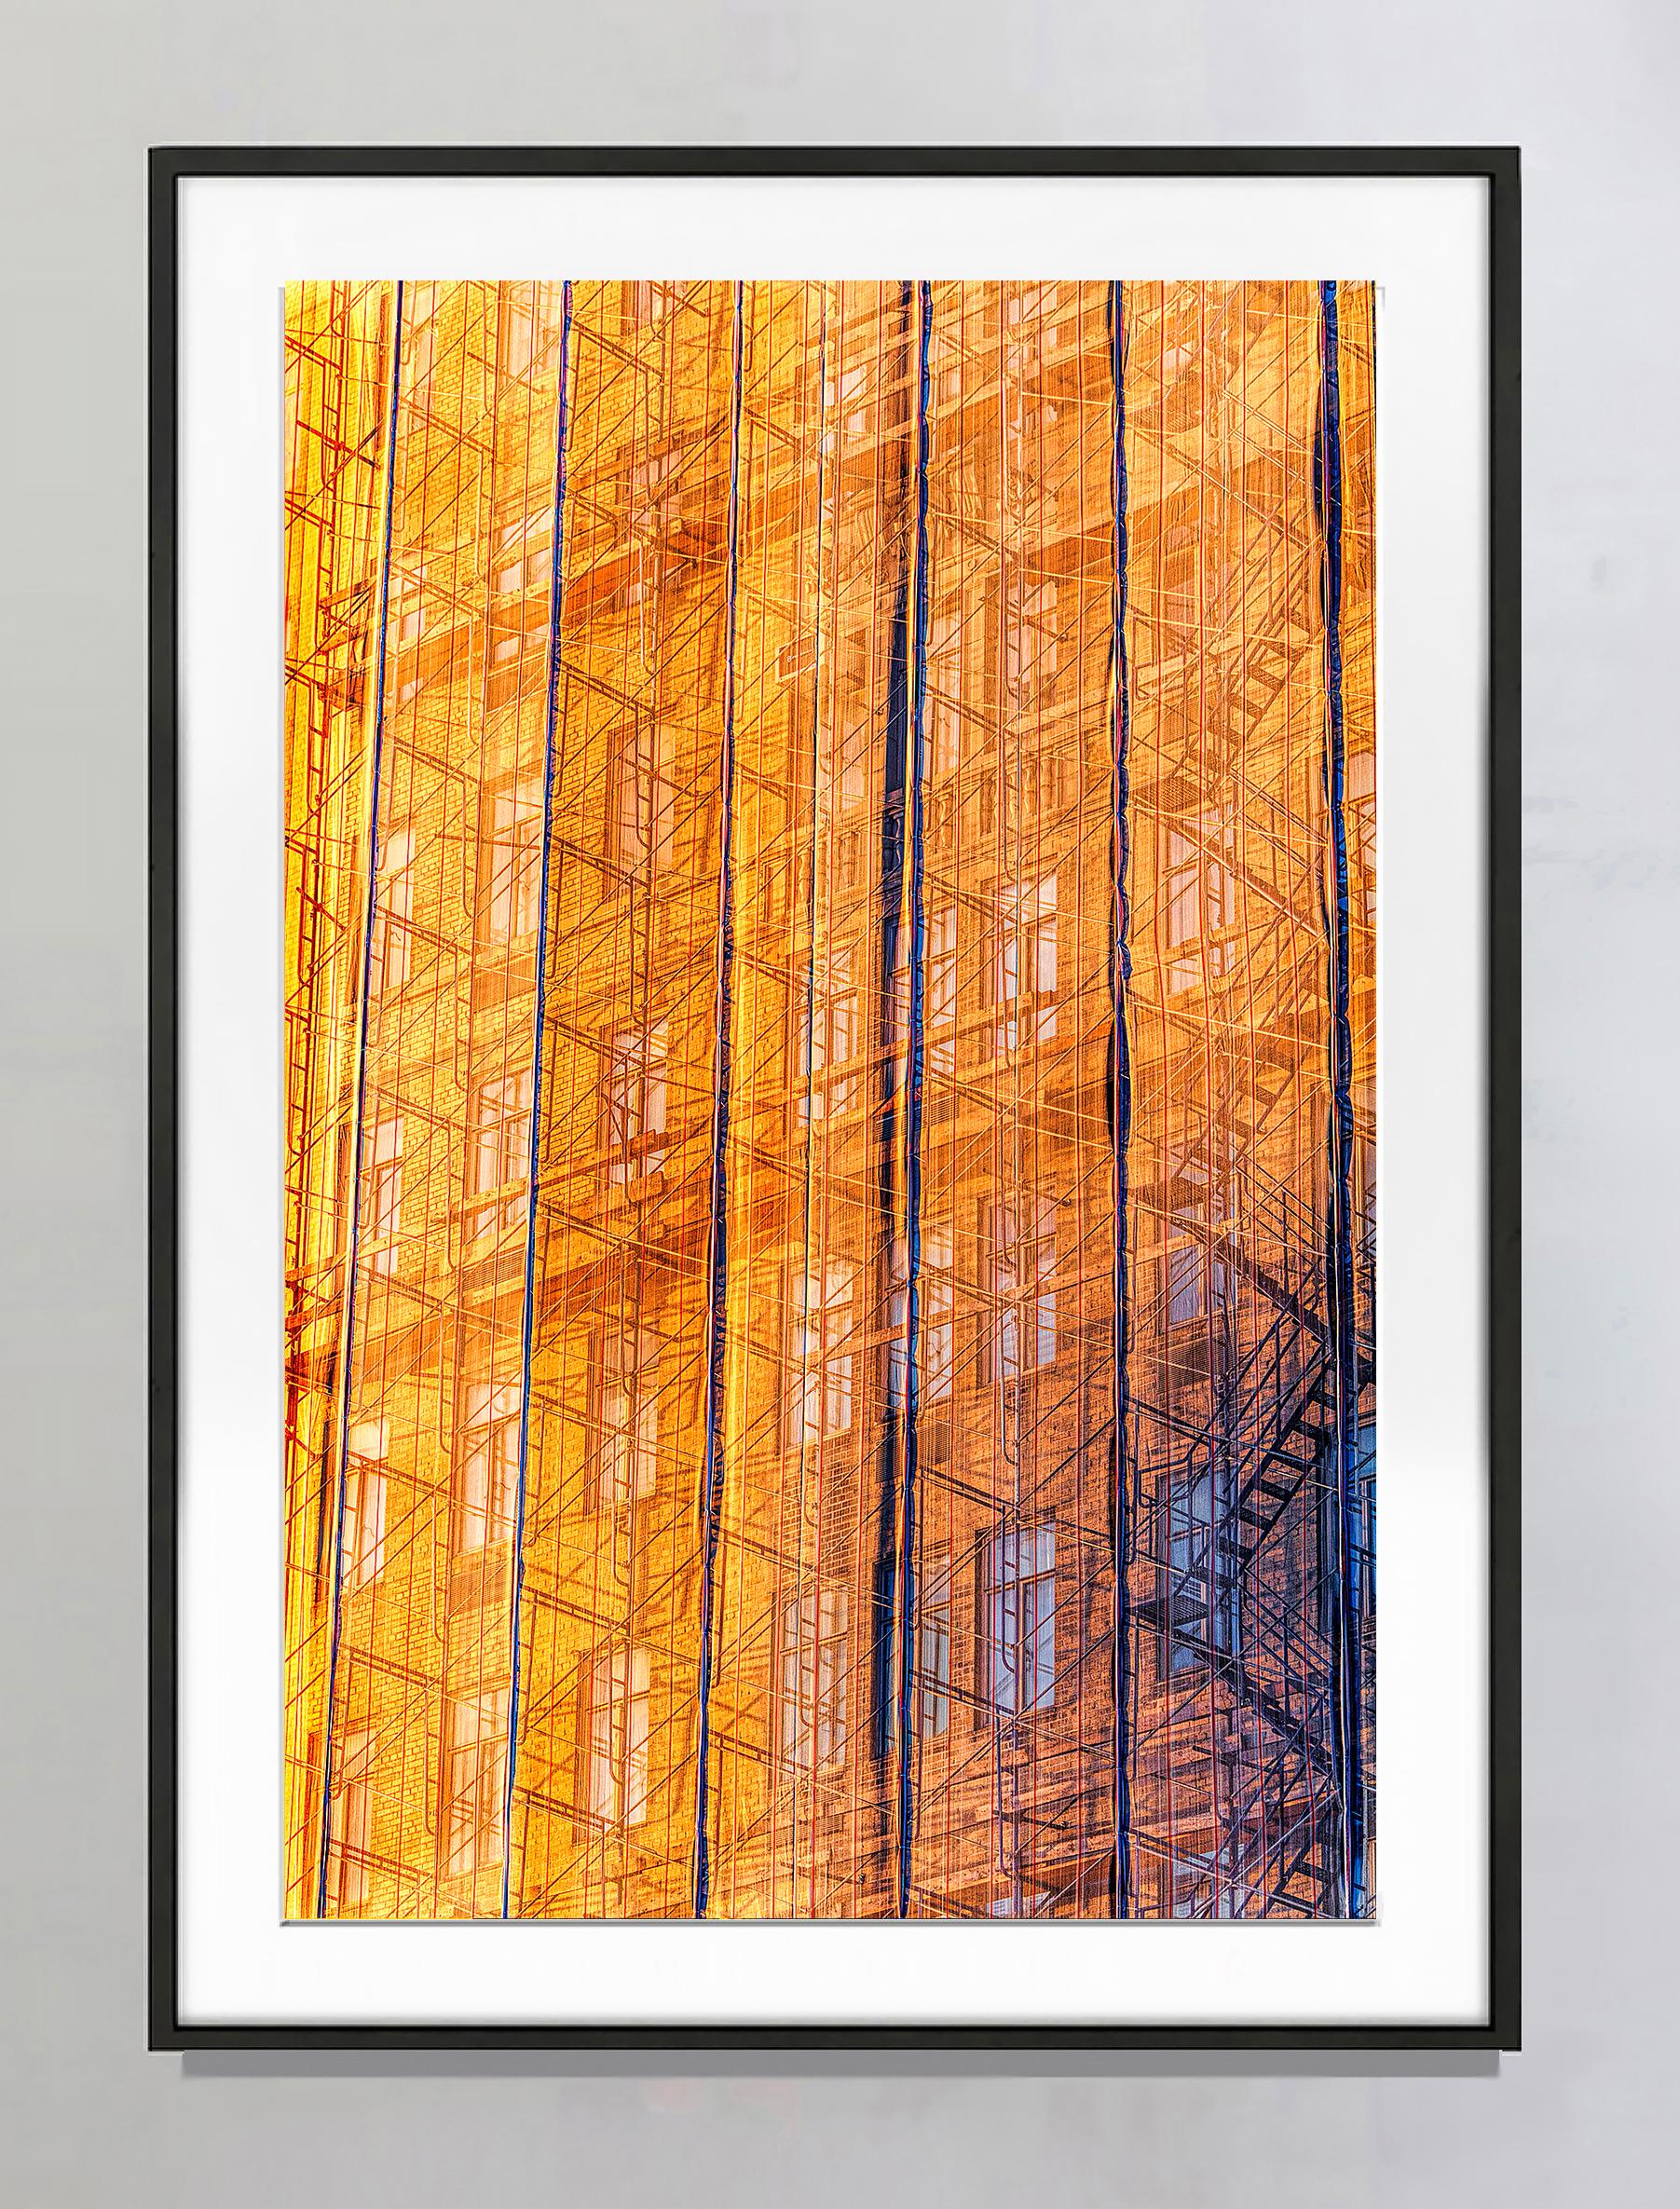 Mitchell Funk follows the light.  Come along with him and become illuminated.  Ephemeral rays of golden light strike an Upper East Side pre-war facade under renovation. The resulting image pulsates with warm golds and oranges.   Funk has